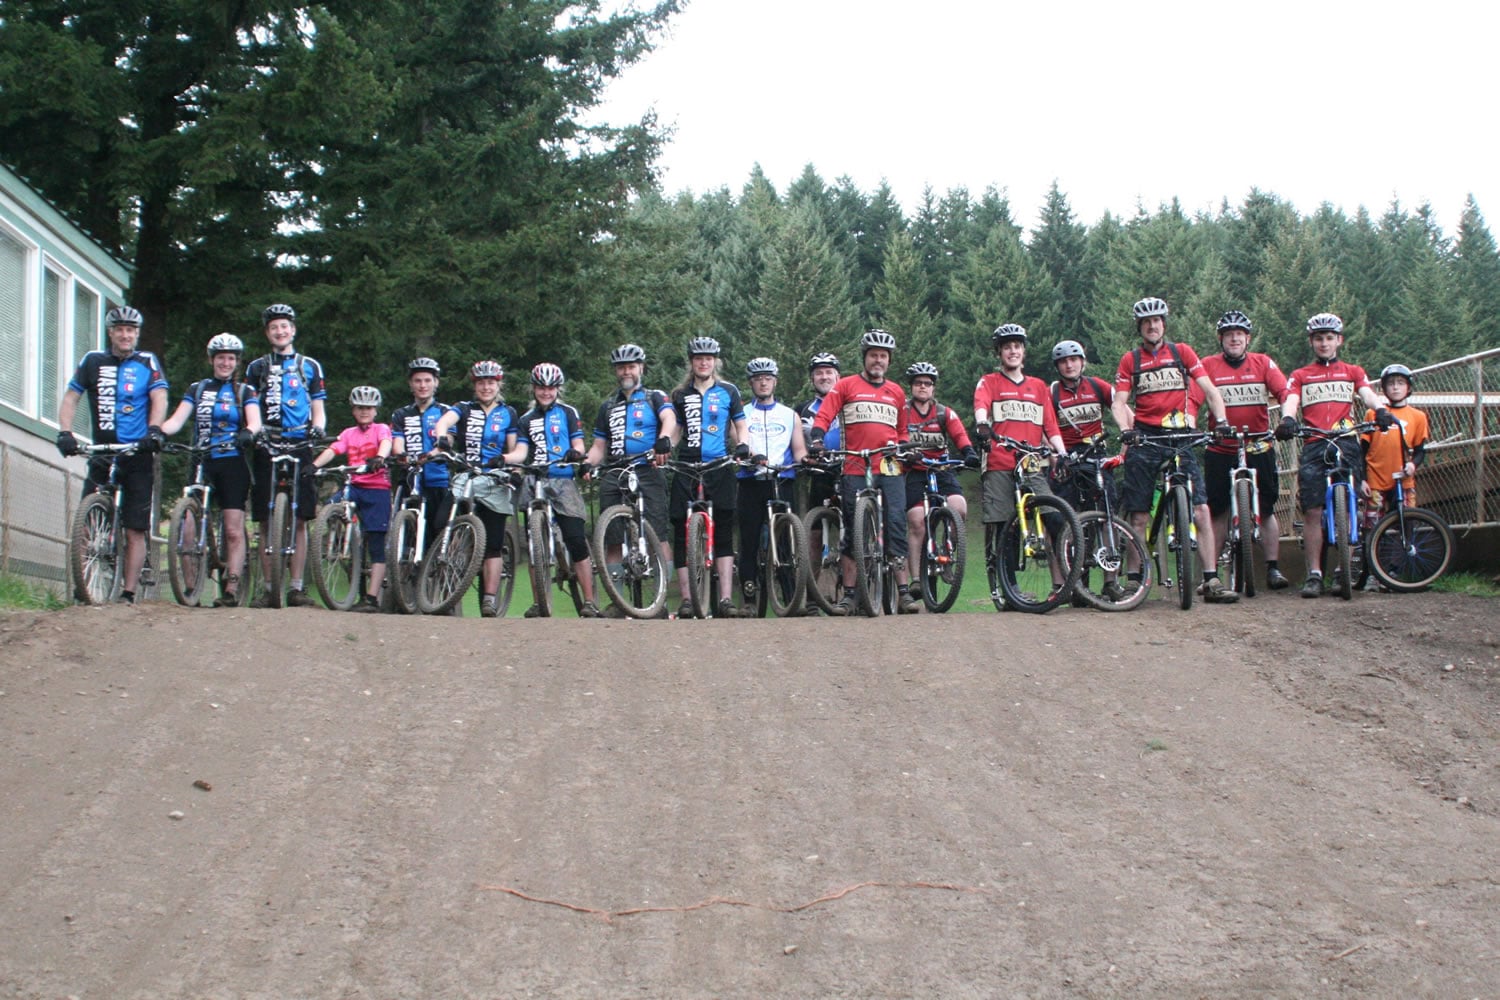 Mountain bikers from Camas, Washougal, Vancouver, Hockinson and Woodland are amped up for the Washougal MX Challenge Sunday, at Washougal Motocross Park.